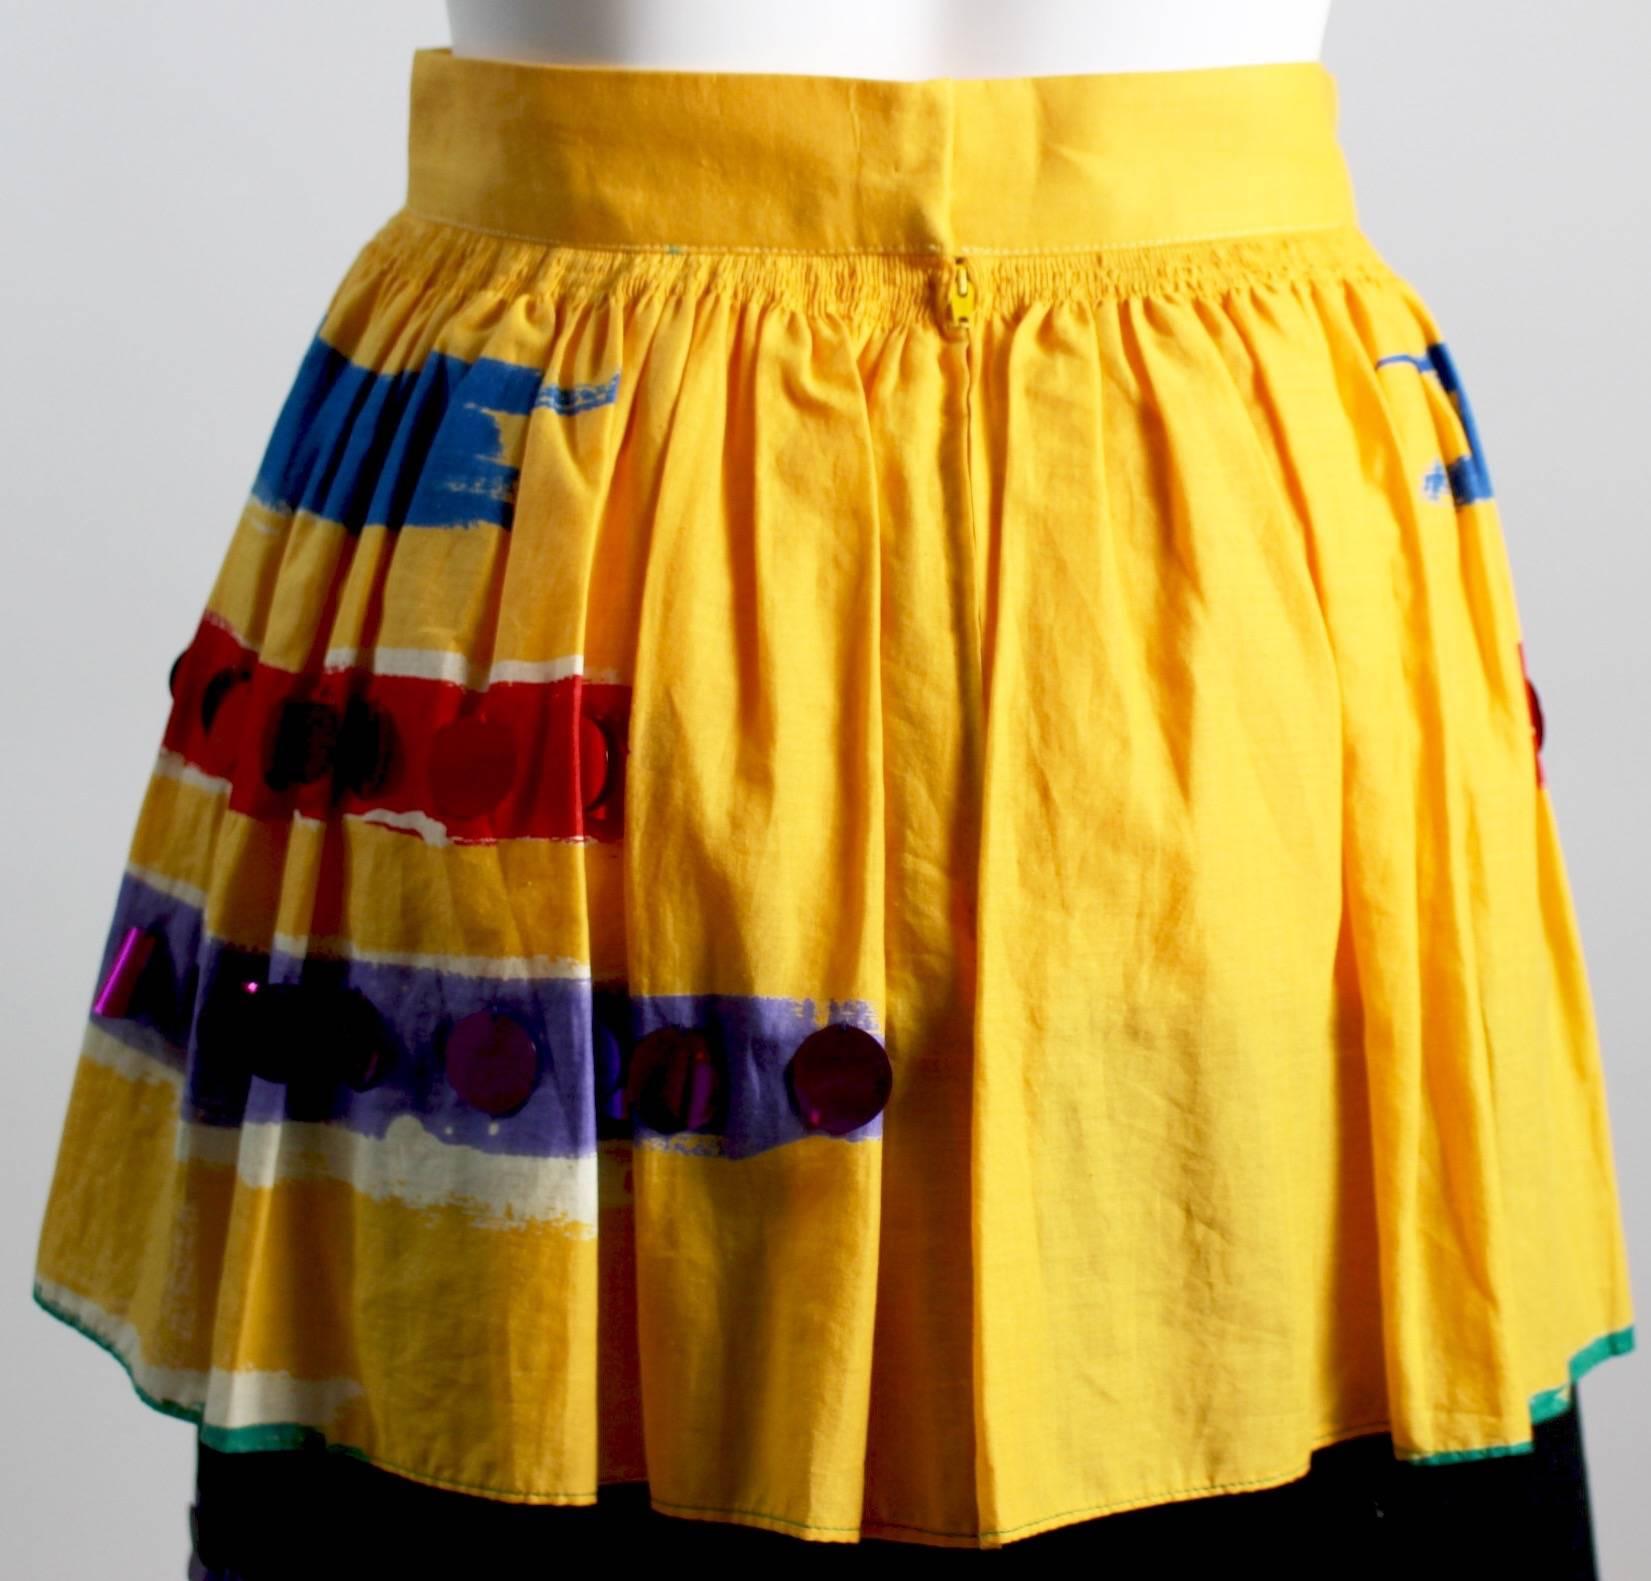  1980s Michaele Vollbrach Colorful Cotton Layered Gypsy Pheasant Skirt  1